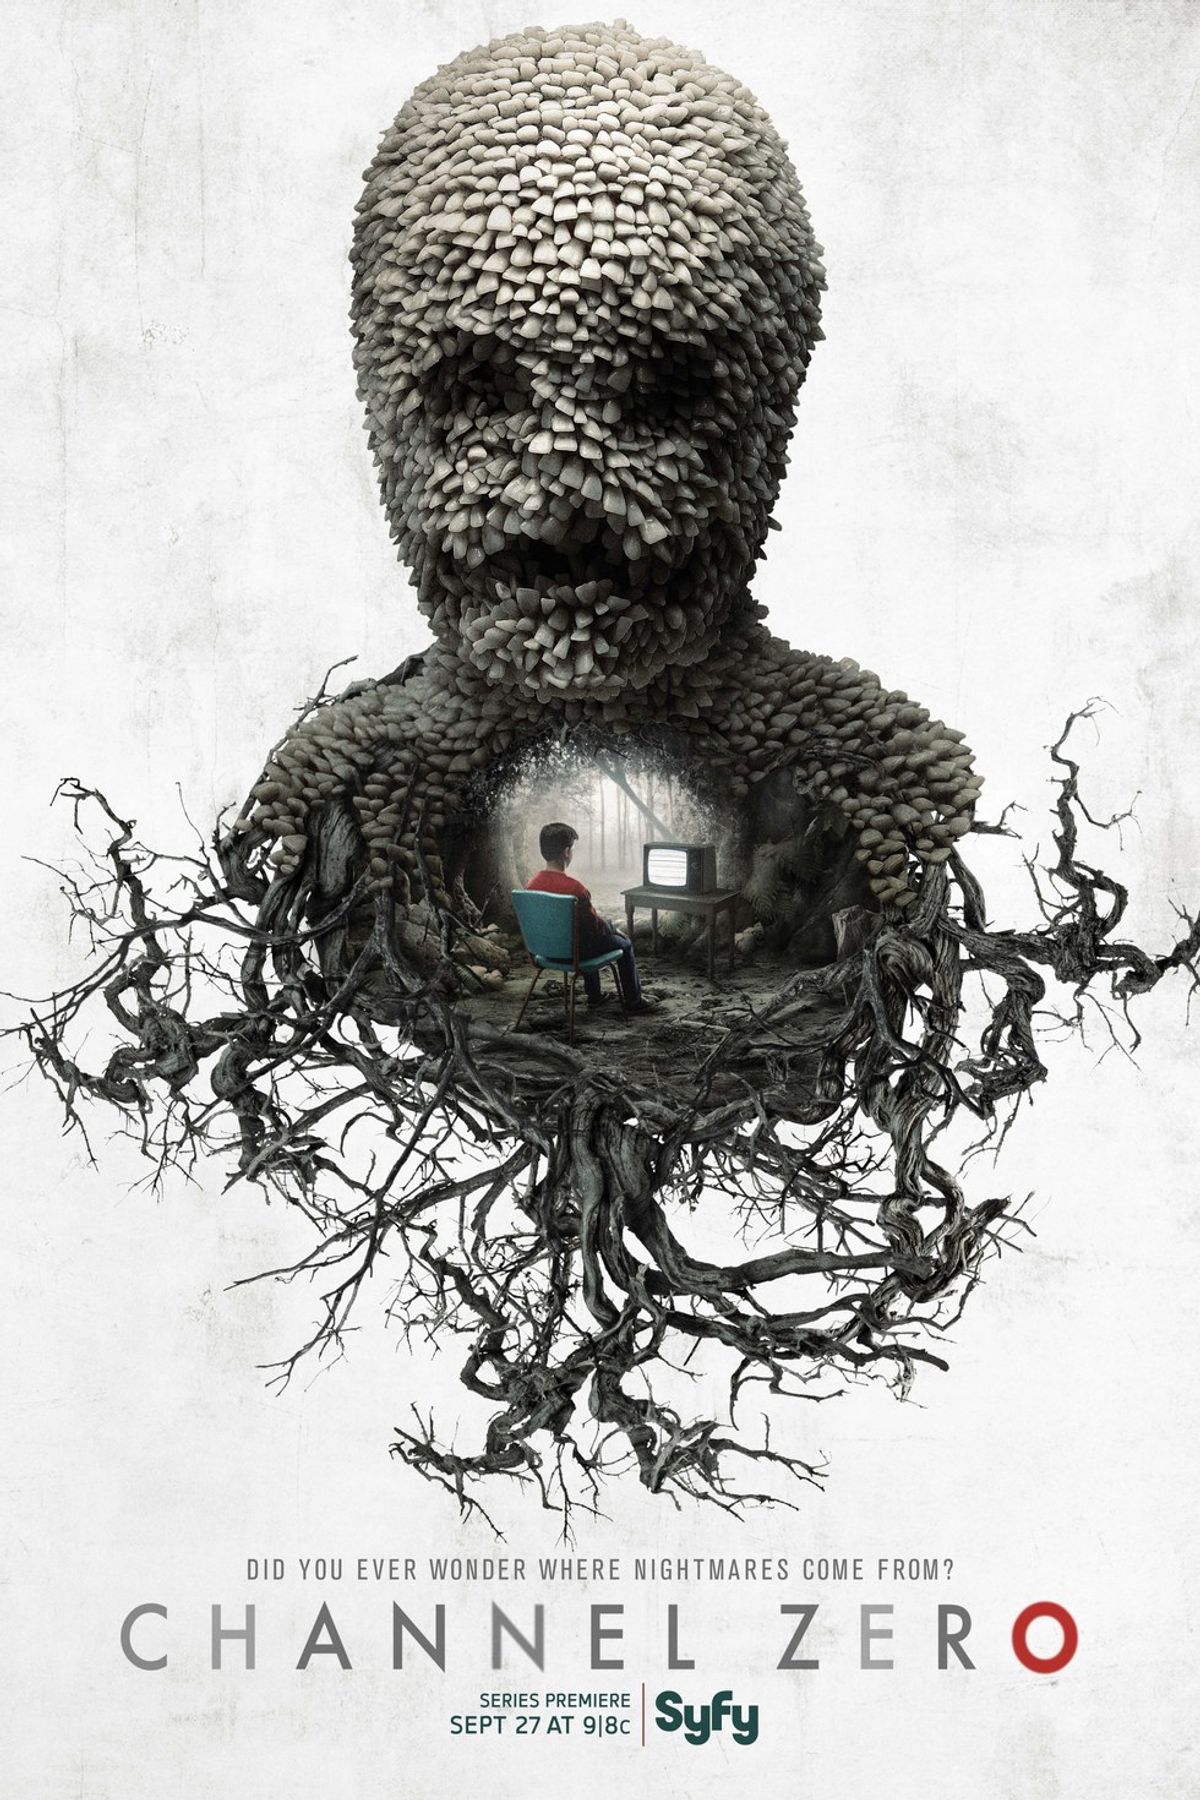 Channel Zero: Candle Cove, taking TV series to the next level